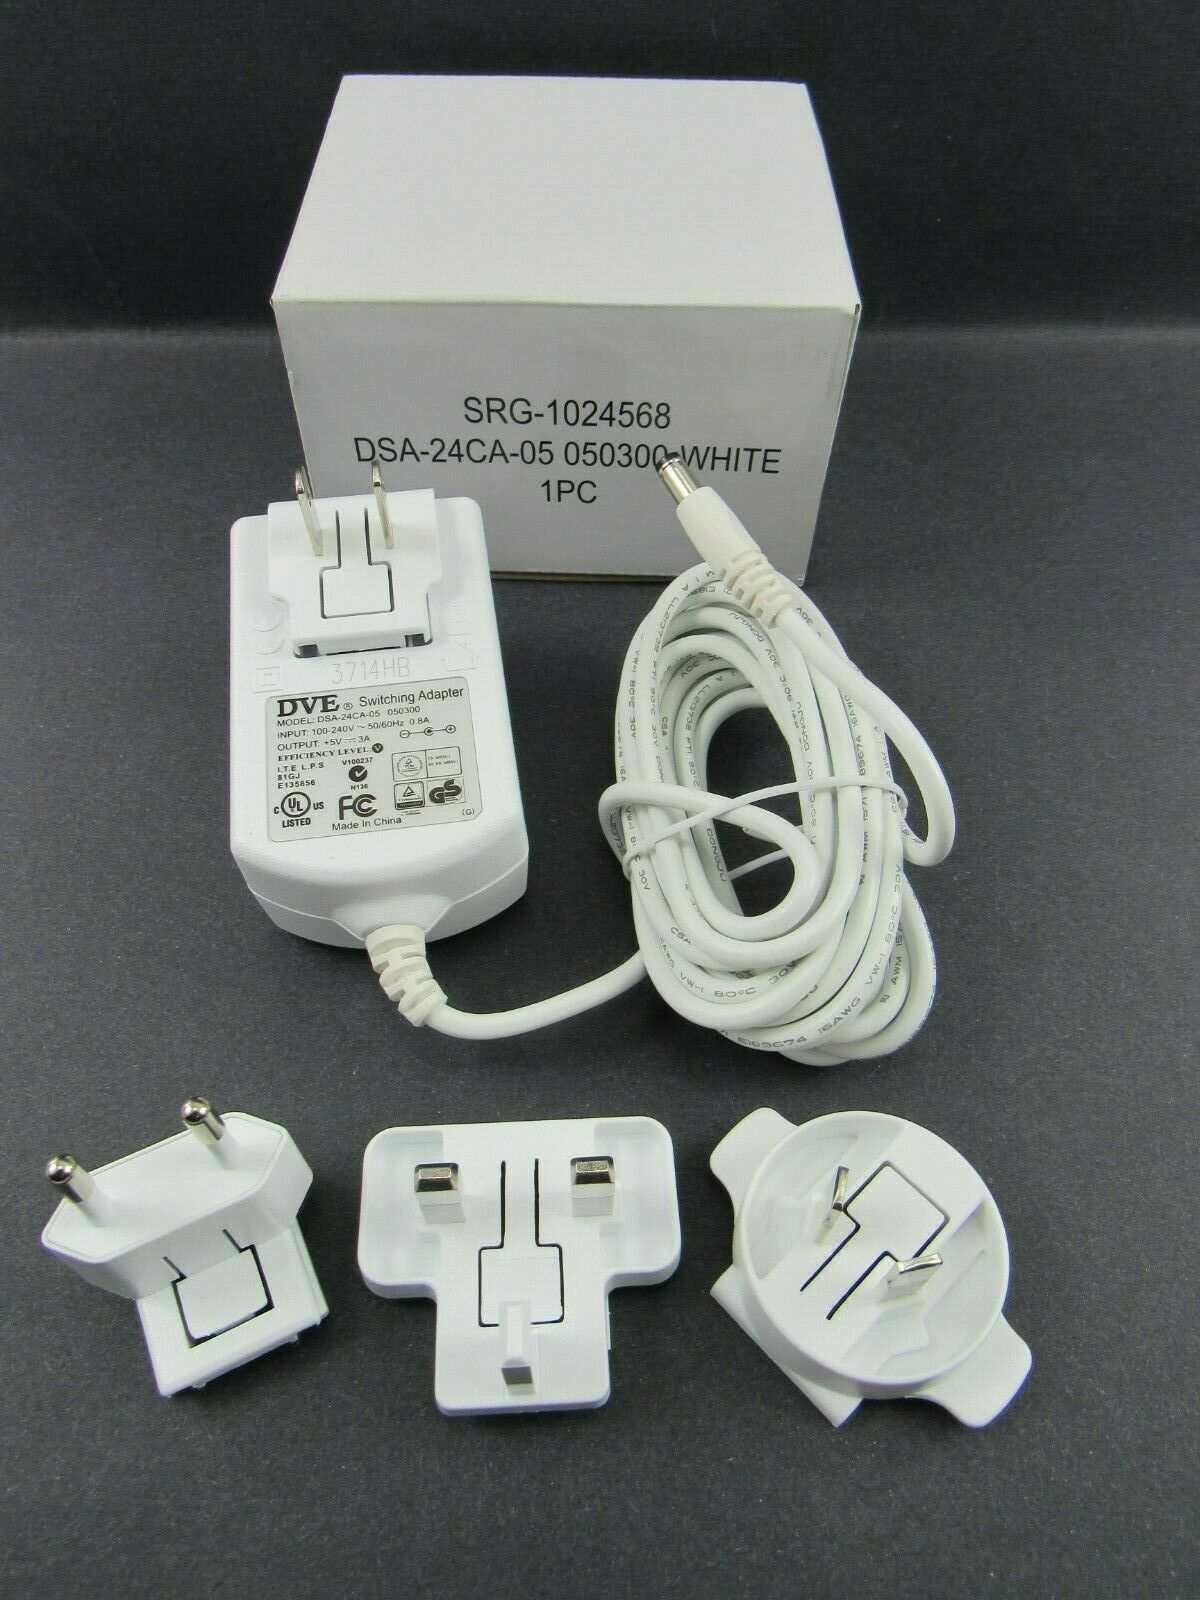 DVE Switching Adapter Model DSA-24CA-05 050300 5V 3A Power AC Adapter Charger Country/Region of Man - Click Image to Close